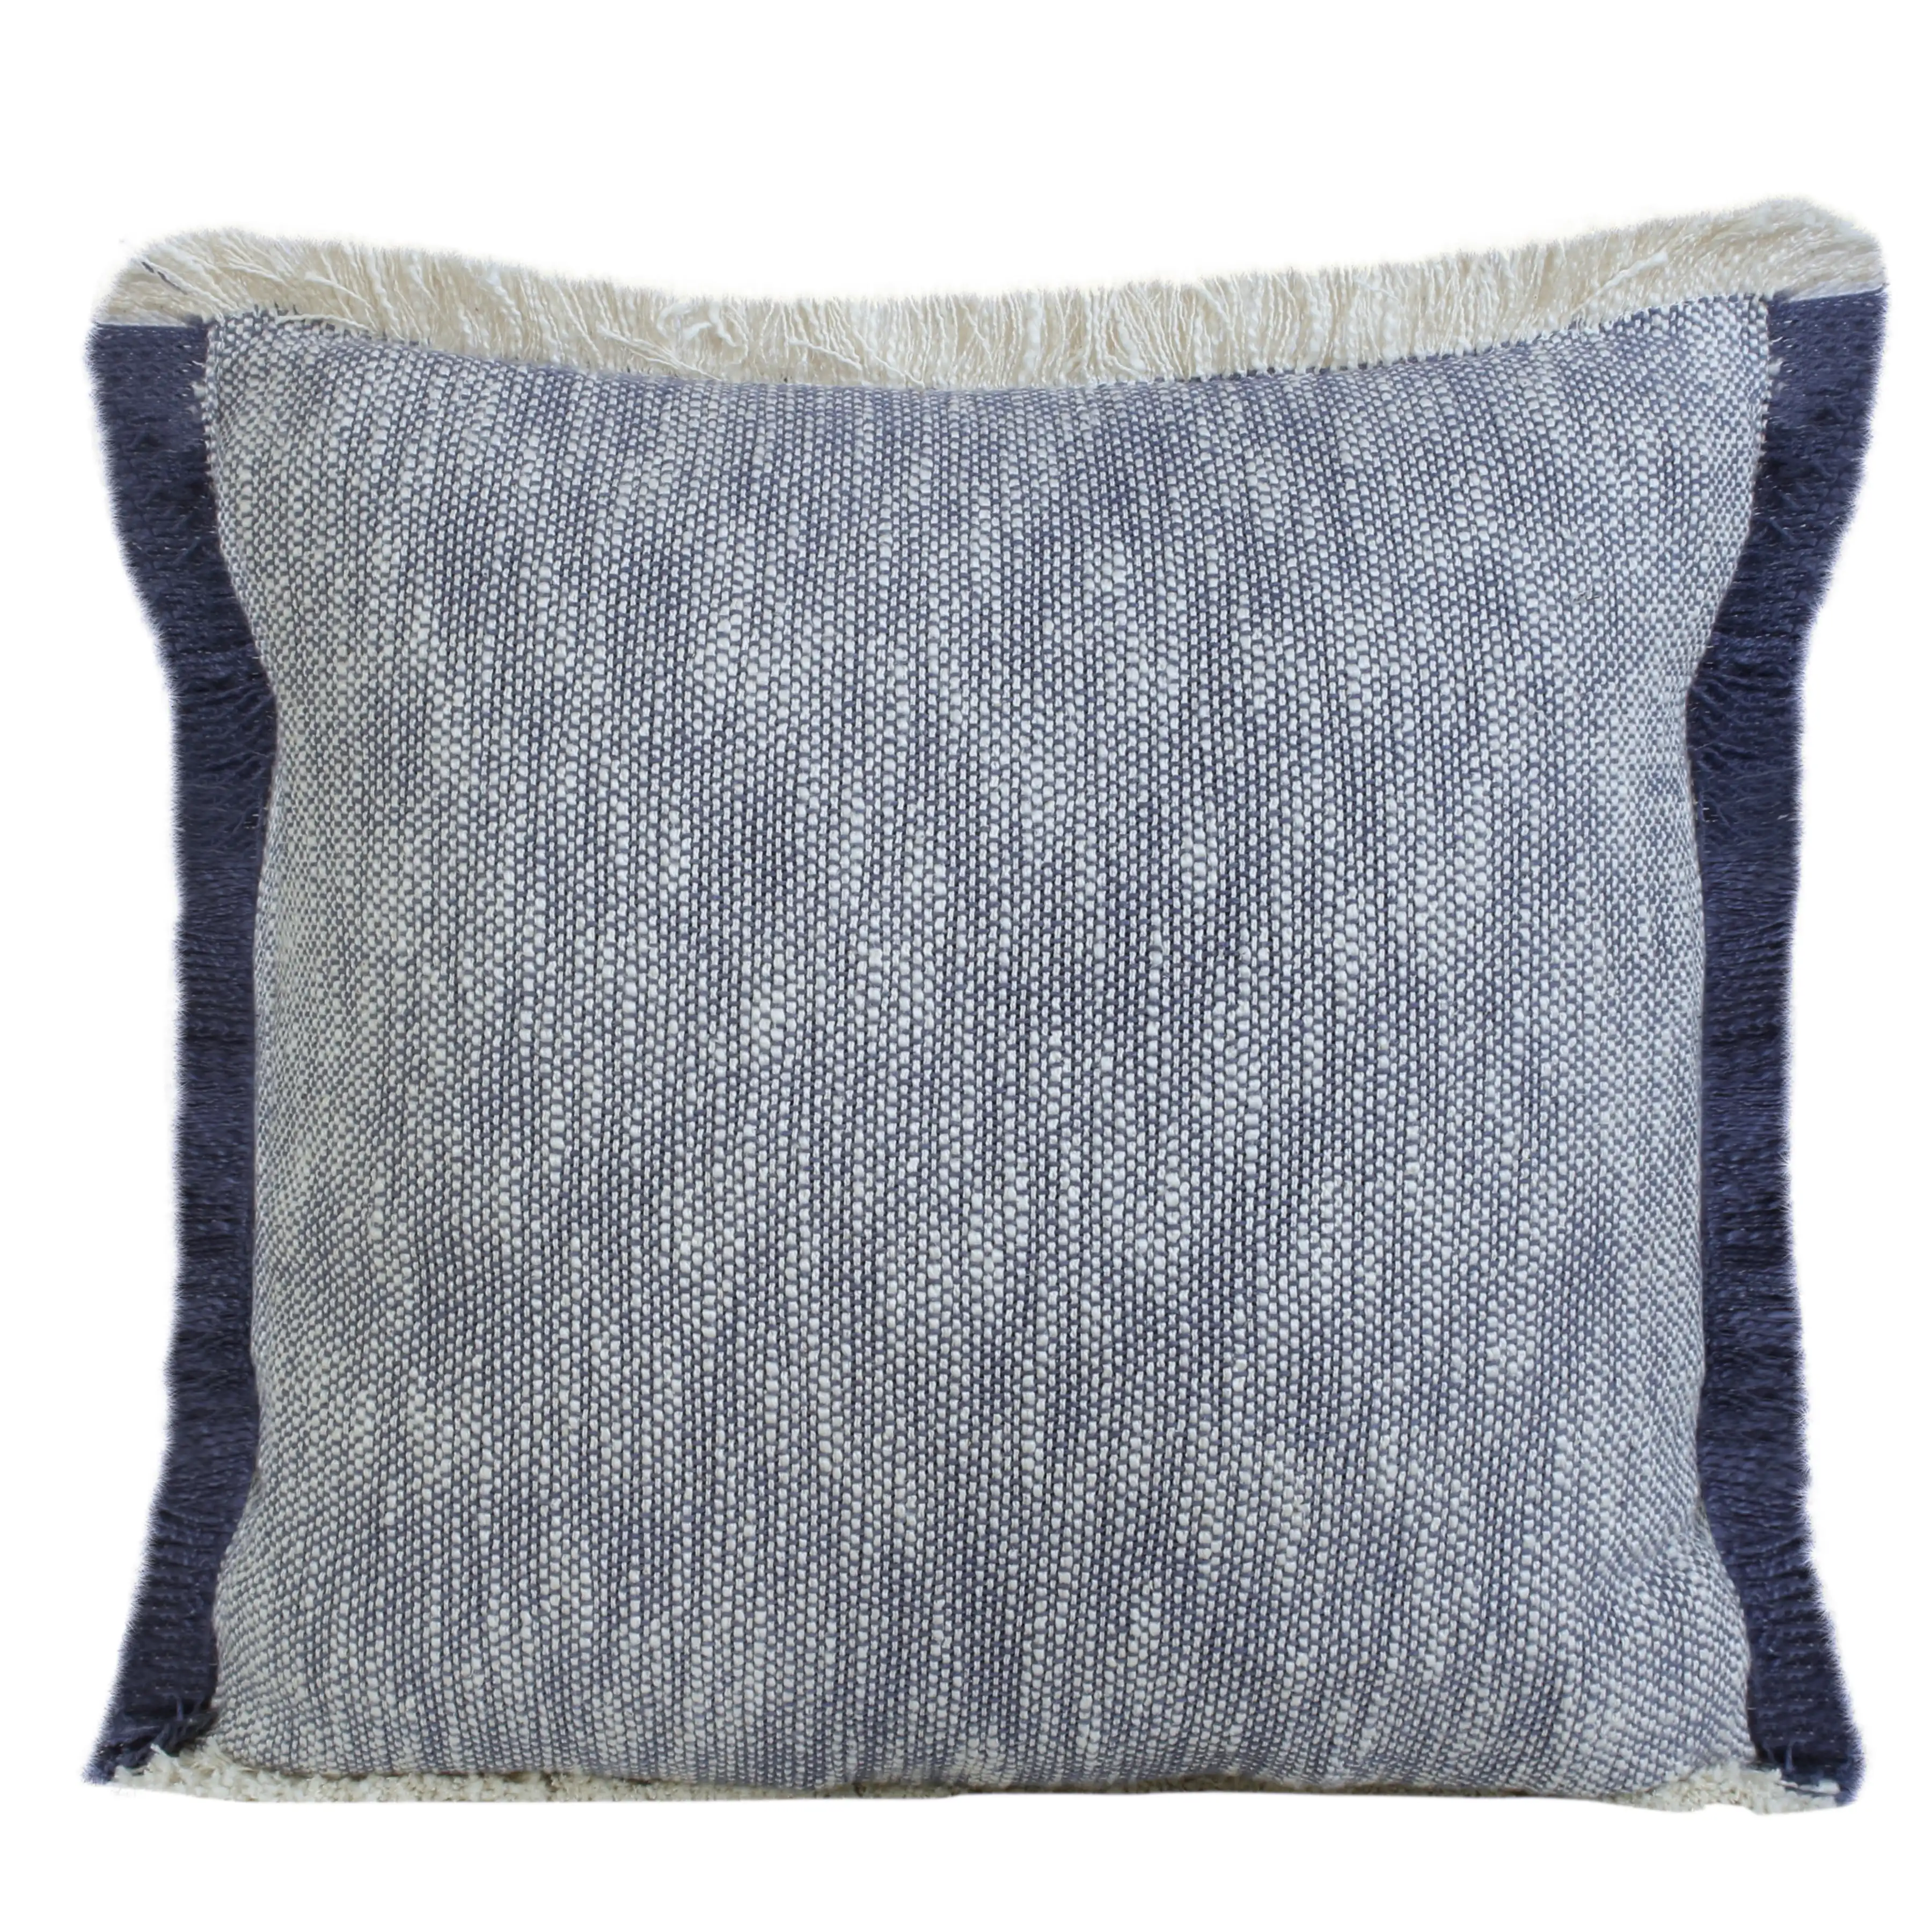 

Woven Paths Unique Neutral Two-Tone Cotton with Fringe Durable Low-profil Luxurious Colorfast Easy To Clean Throw Pillow